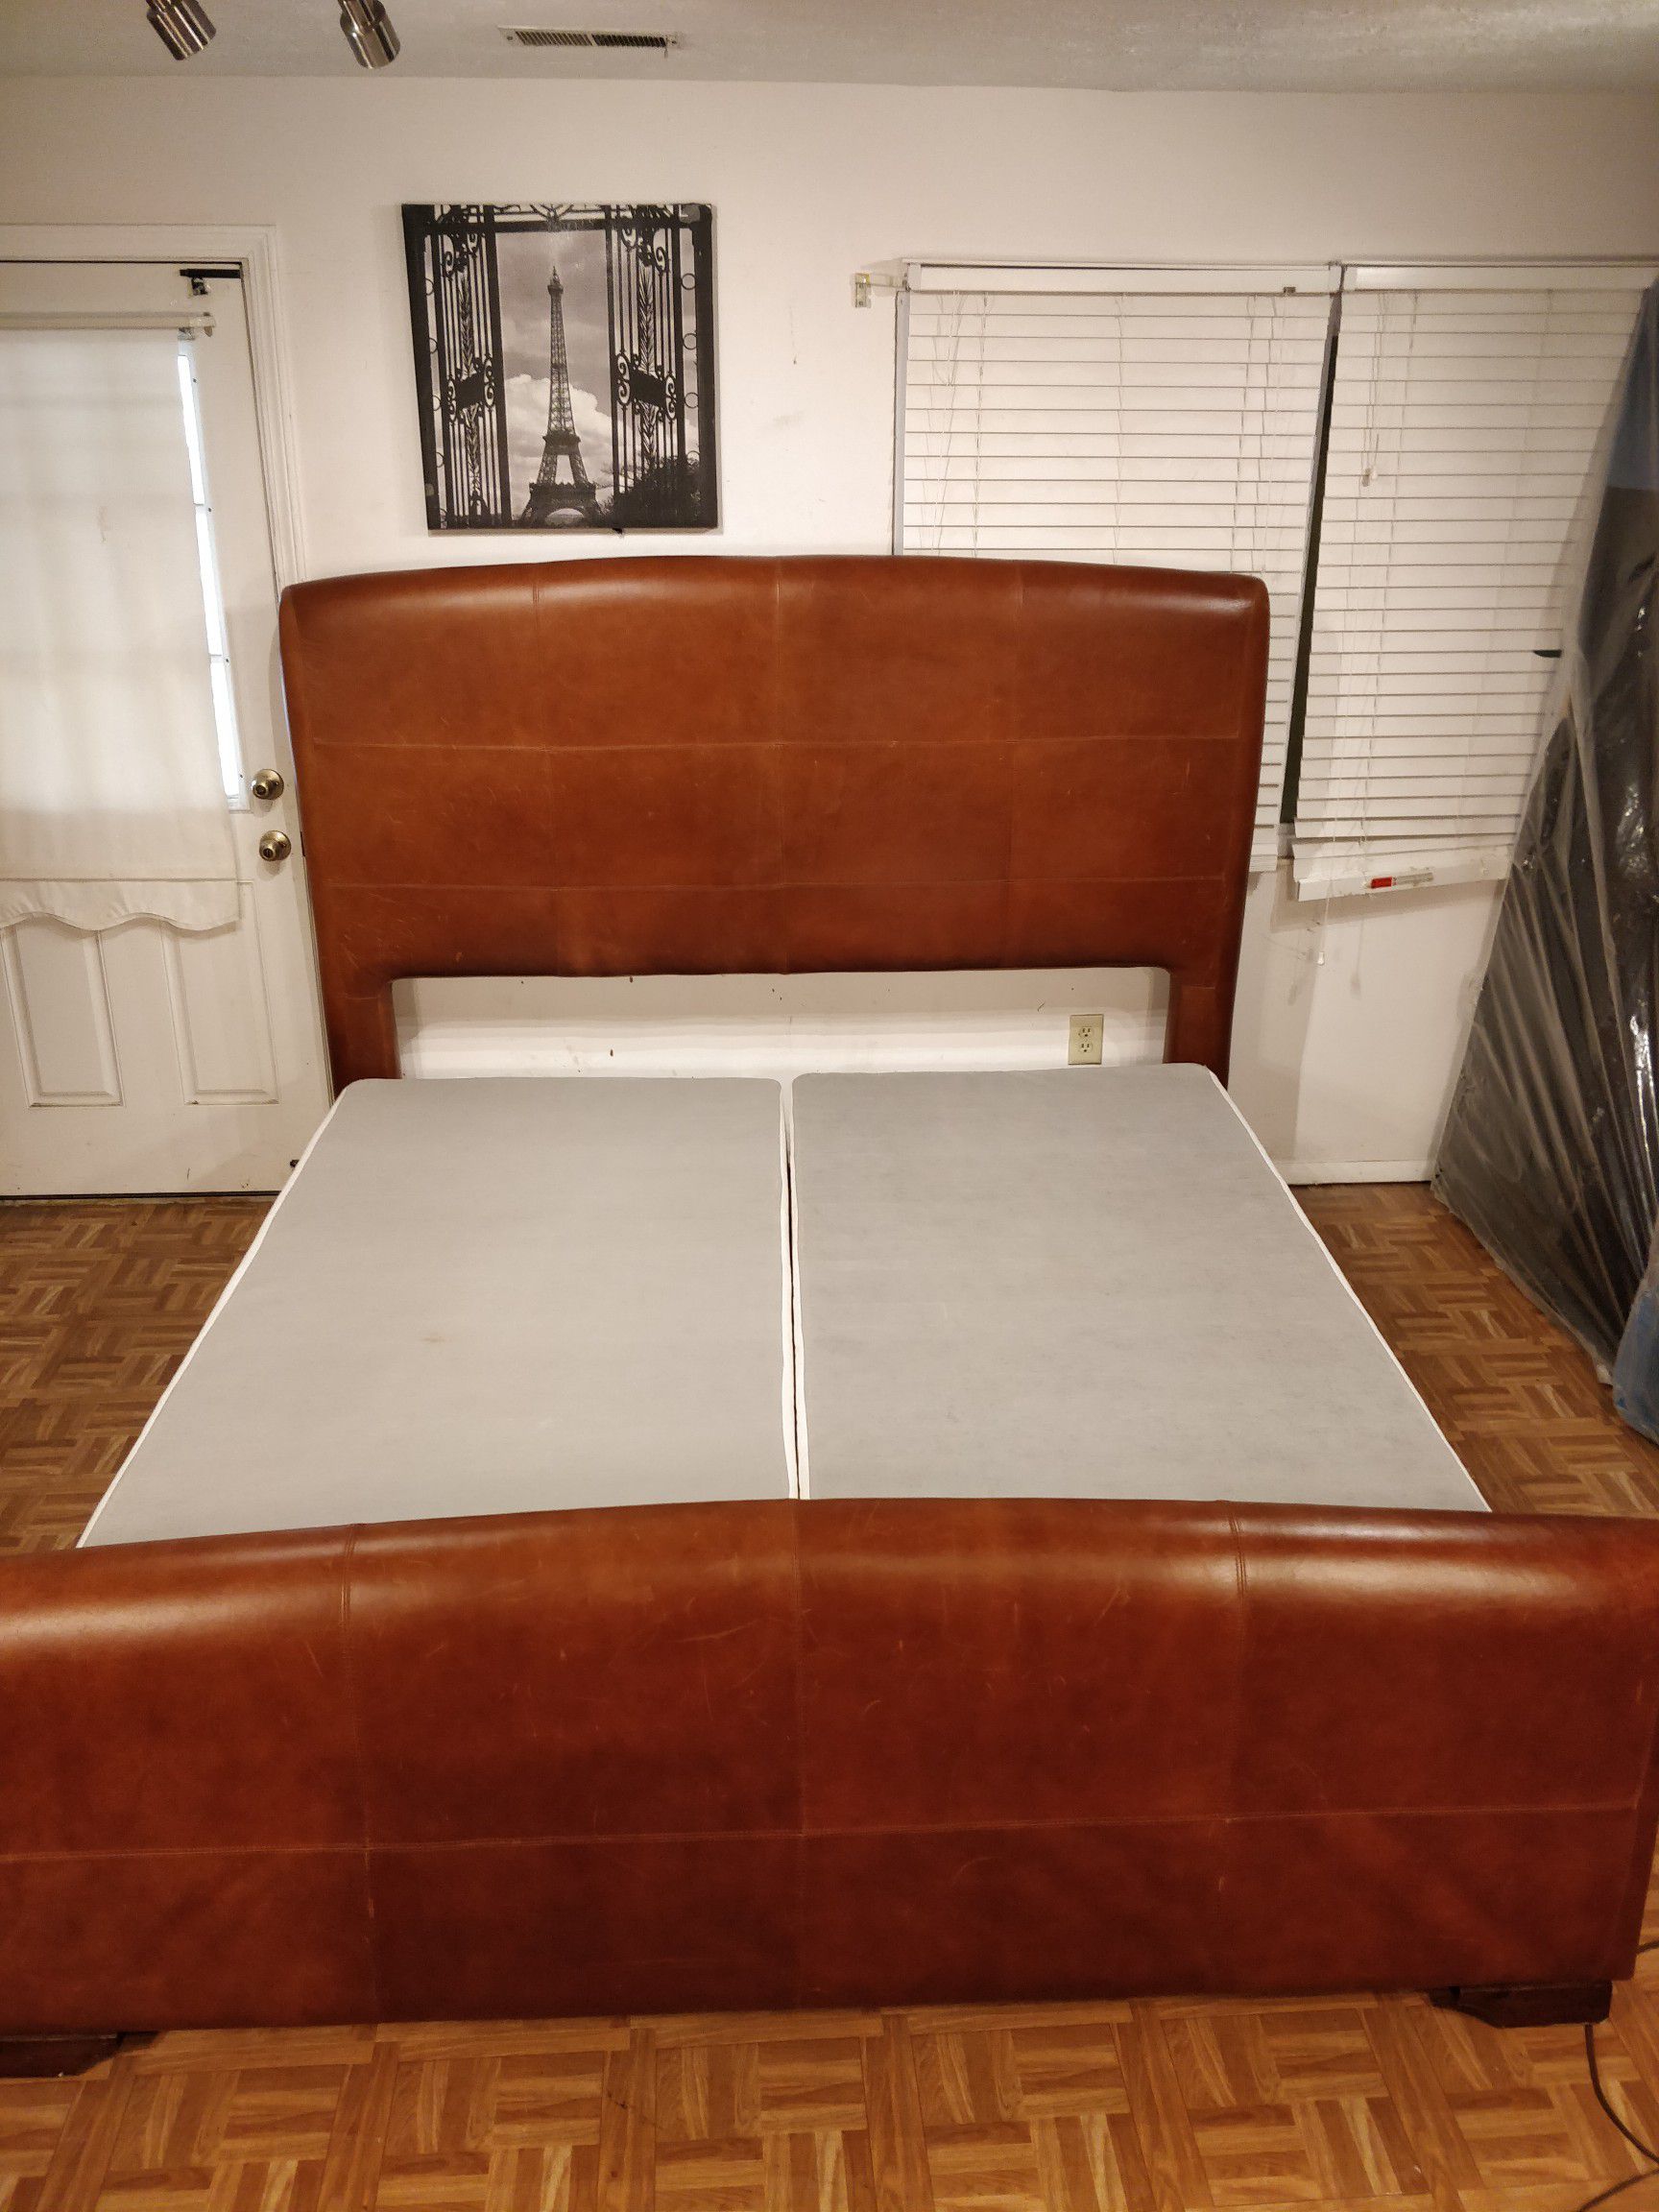 STANLEY FURNITURE leather (KING SIZE) bed frame with box spring, let me know when can you come o